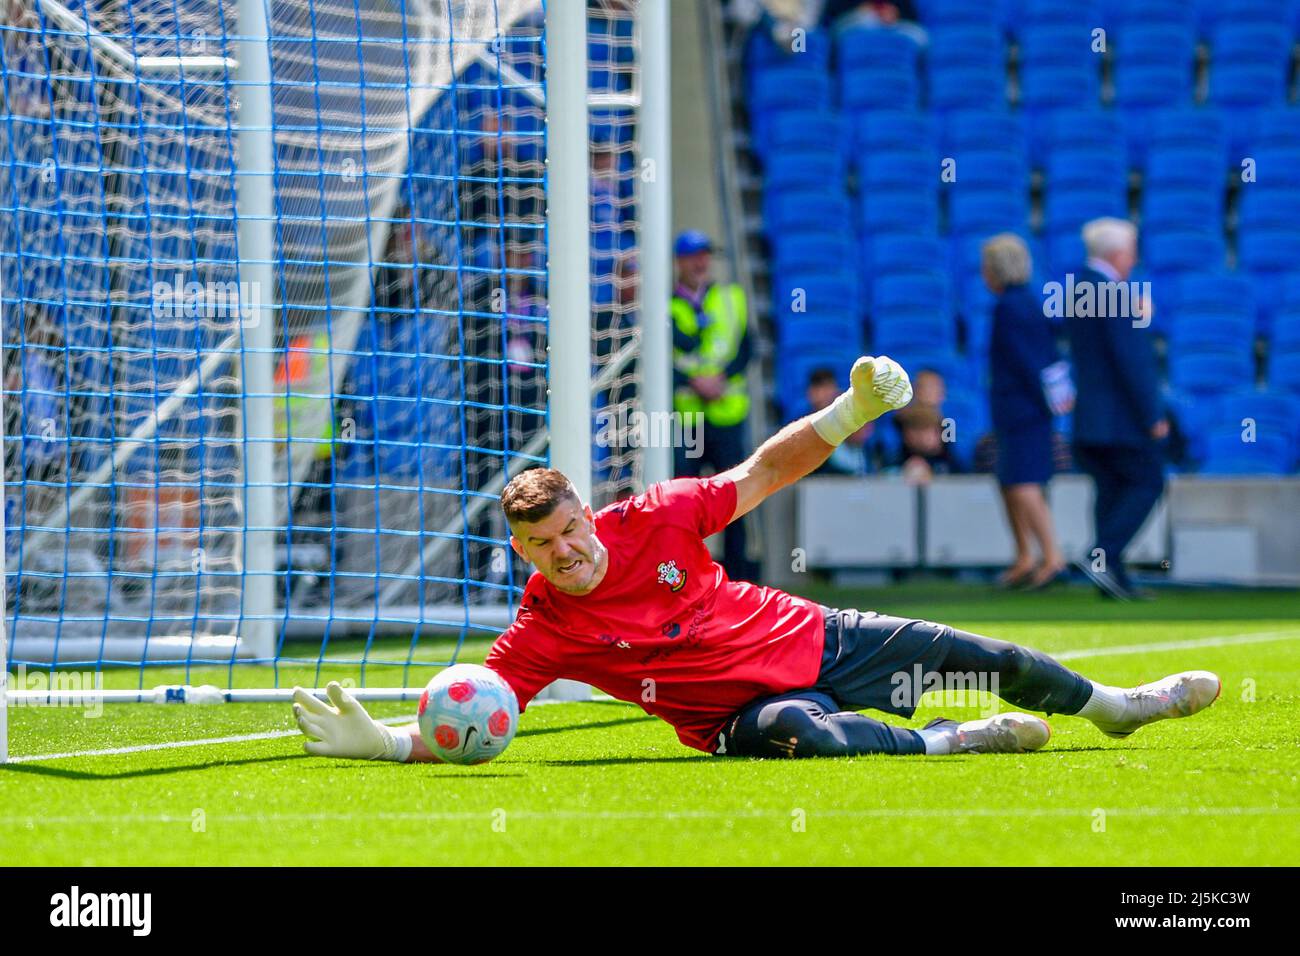 Brighton, UK. 24th Apr, 2022. Fraser Forster Goalkeeper of Southampton during the Premier League match between Brighton & Hove Albion and Southampton at The Amex on April 24th 2022 in Brighton, England. (Photo by Jeff Mood/phcimages.com) Credit: PHC Images/Alamy Live News Stock Photo